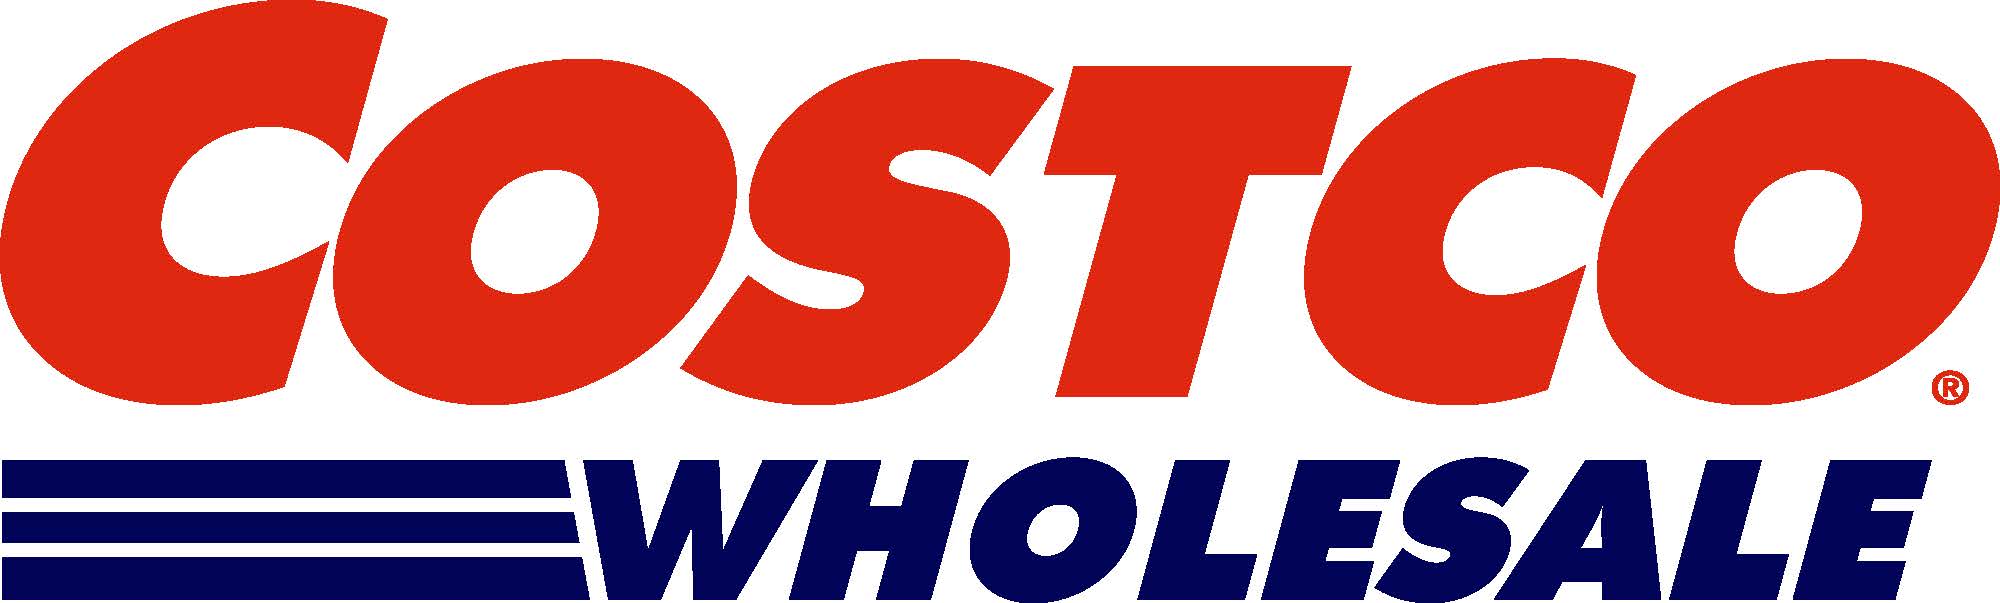 Costco $25 off $250 coupon. Check your email. YMMV. Expires 4/21